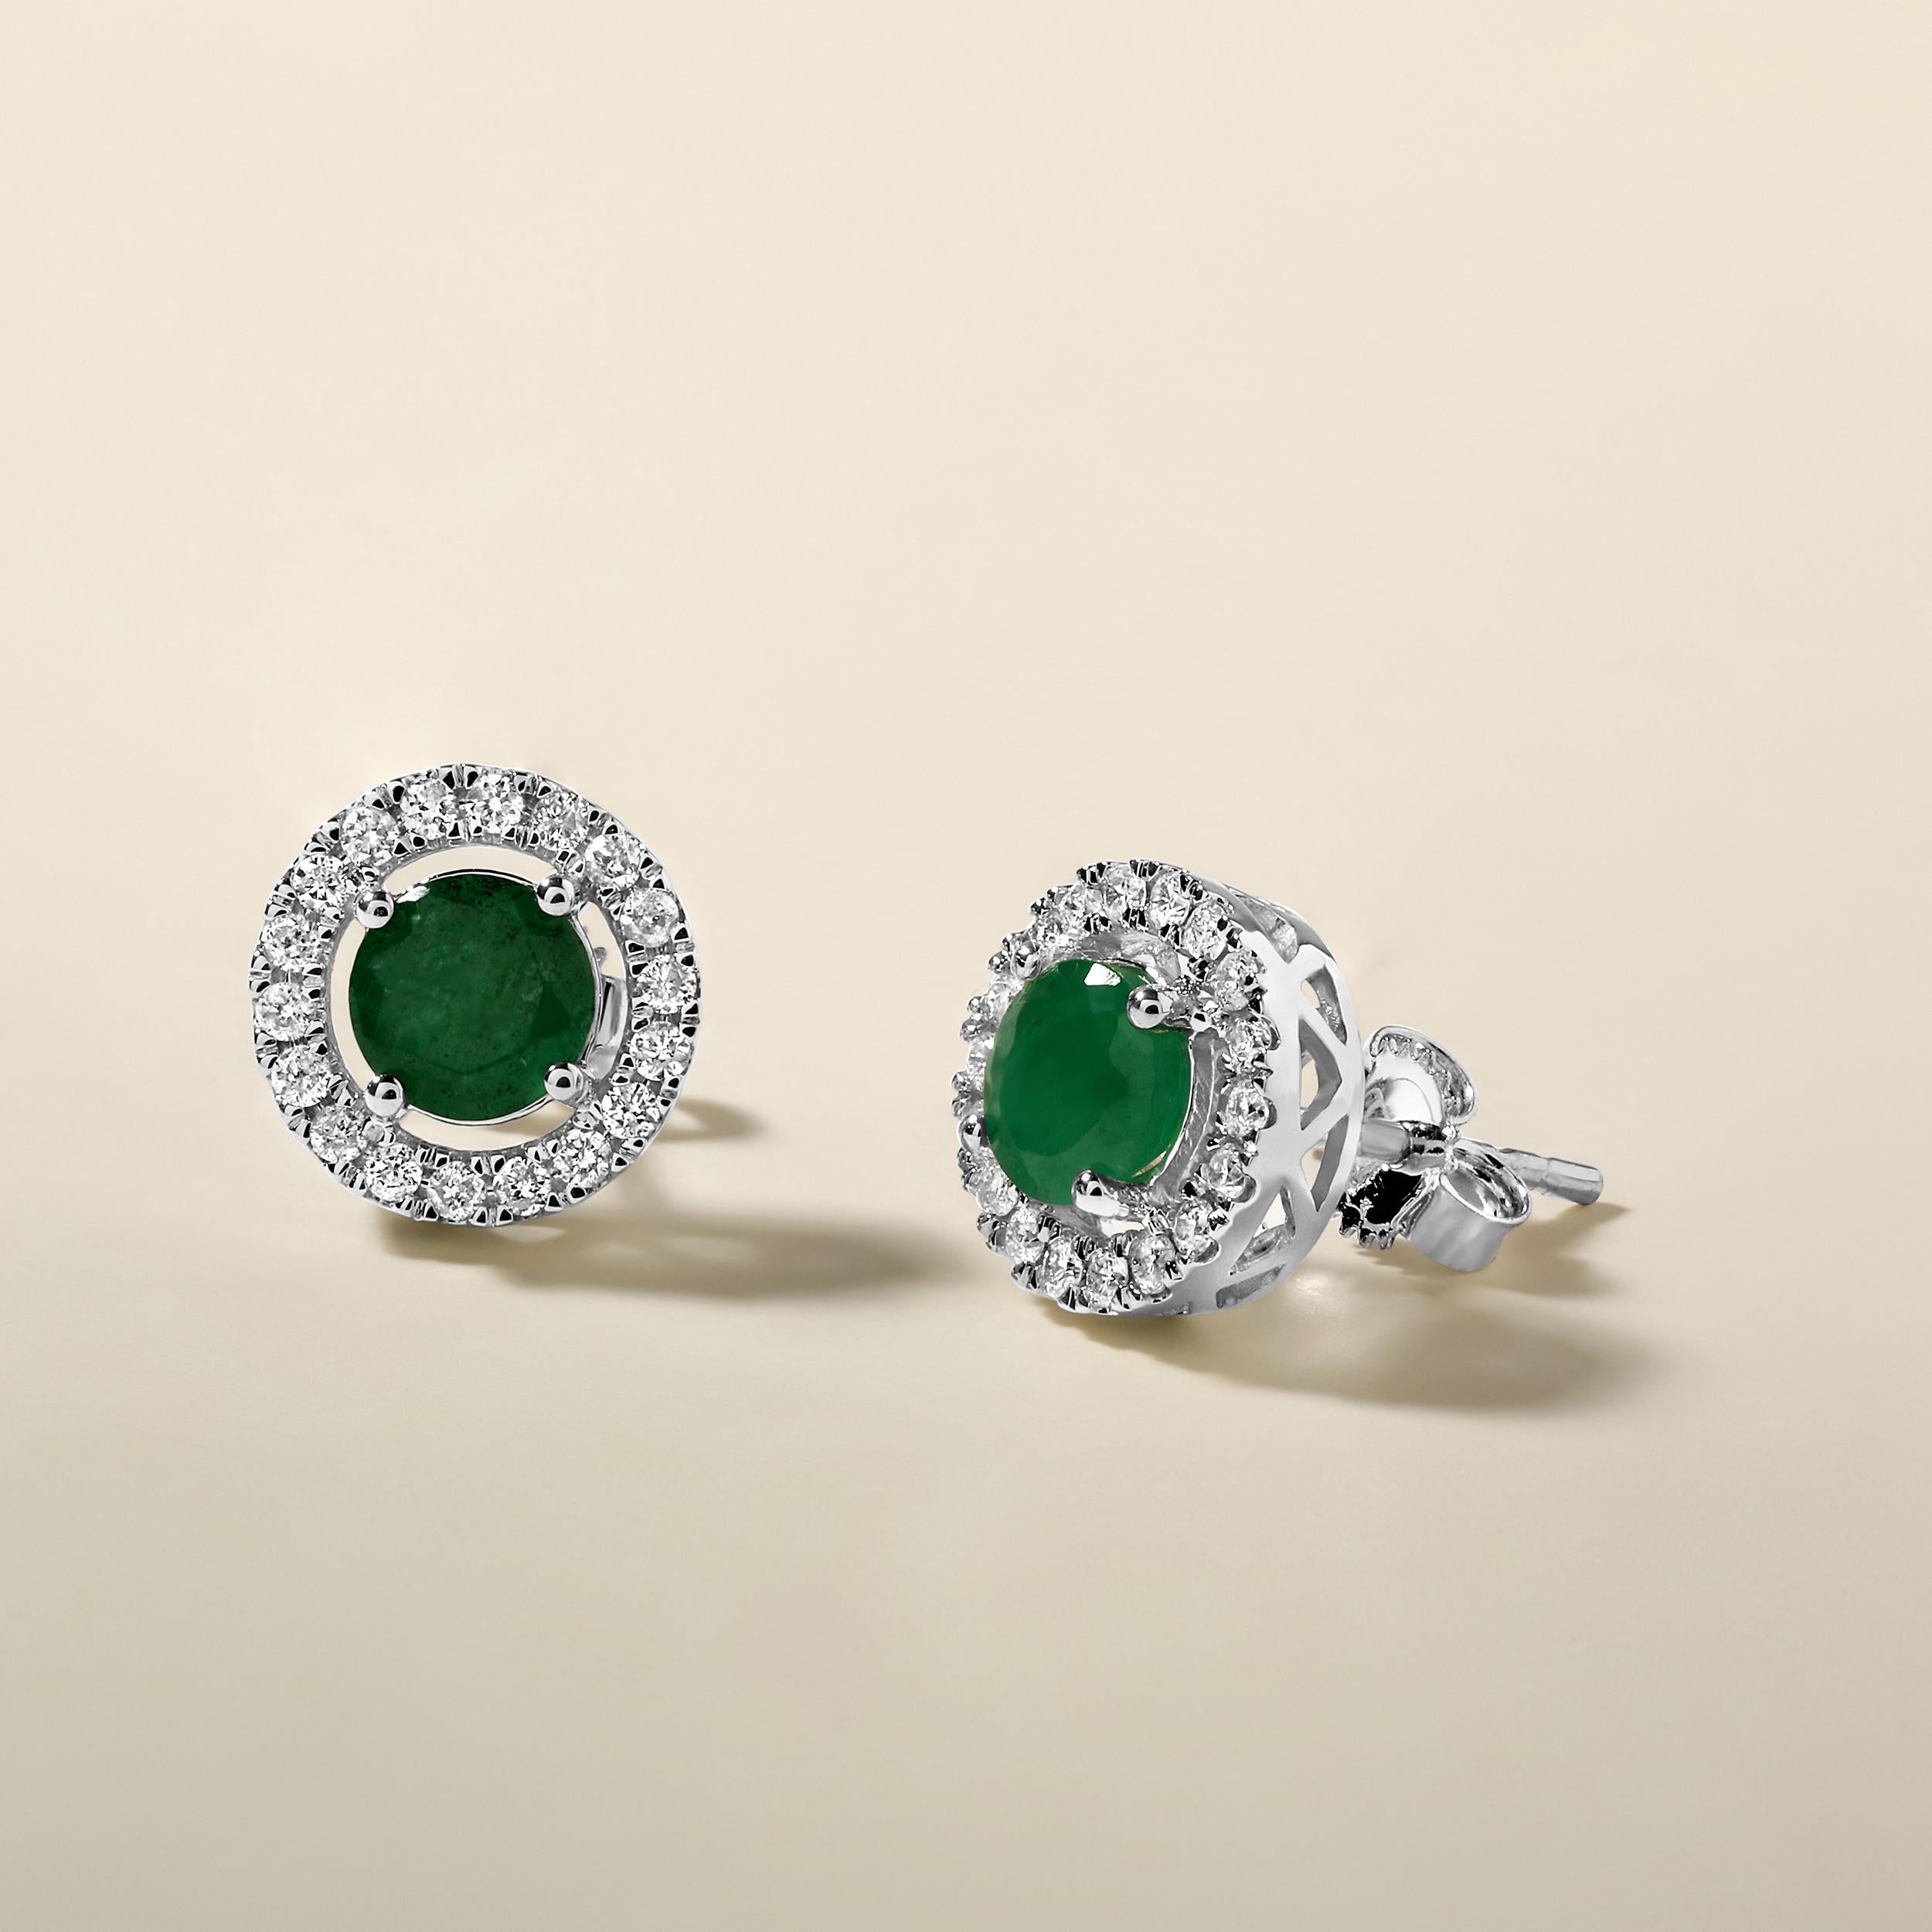 Crafted in 2.44 grams of 14K White Gold, the earrings contain 36 stones of Round Natural Diamonds with a total of 0.29 carat in F-G color and I1-I2 clarity combined with 2 stones of Round Shaped Natural Emerald Gemstones with a total of 1.12